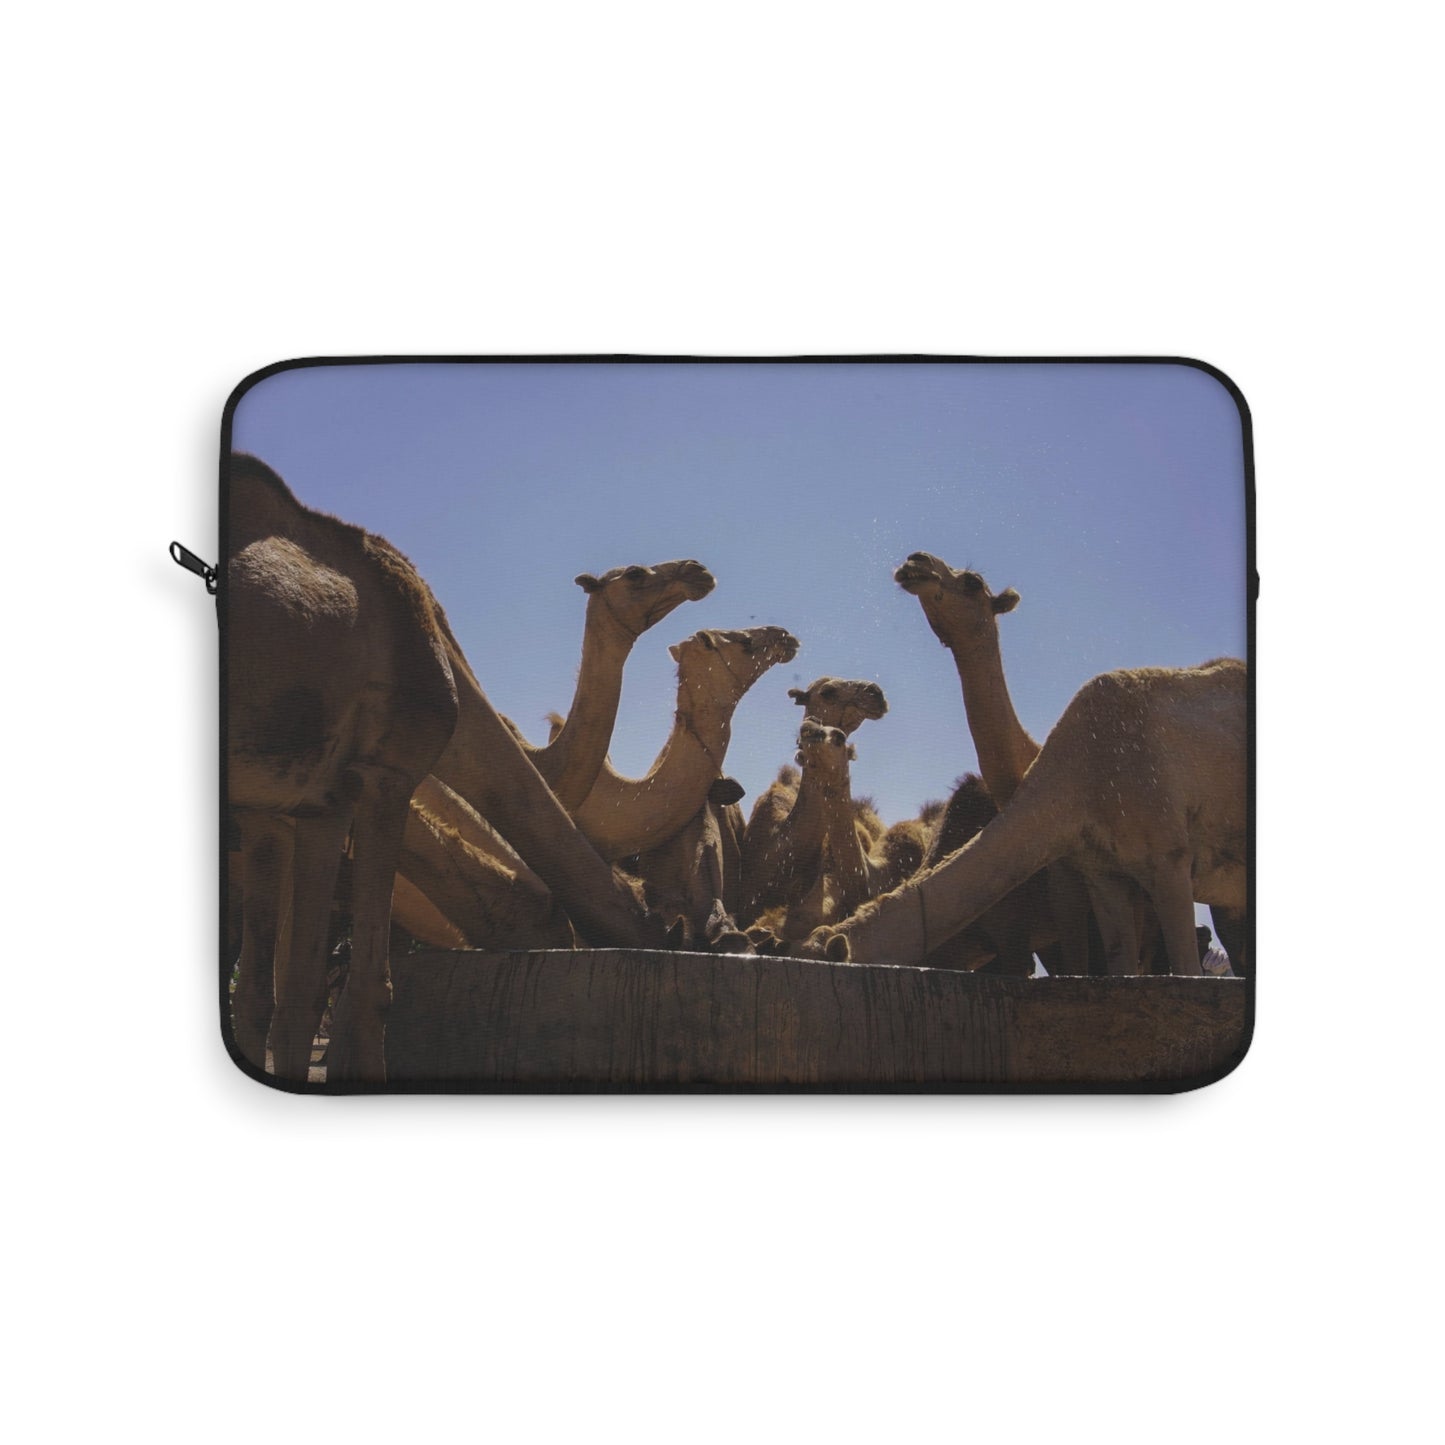 Laptop Sleeve - Camels by Abdilaahi Persia